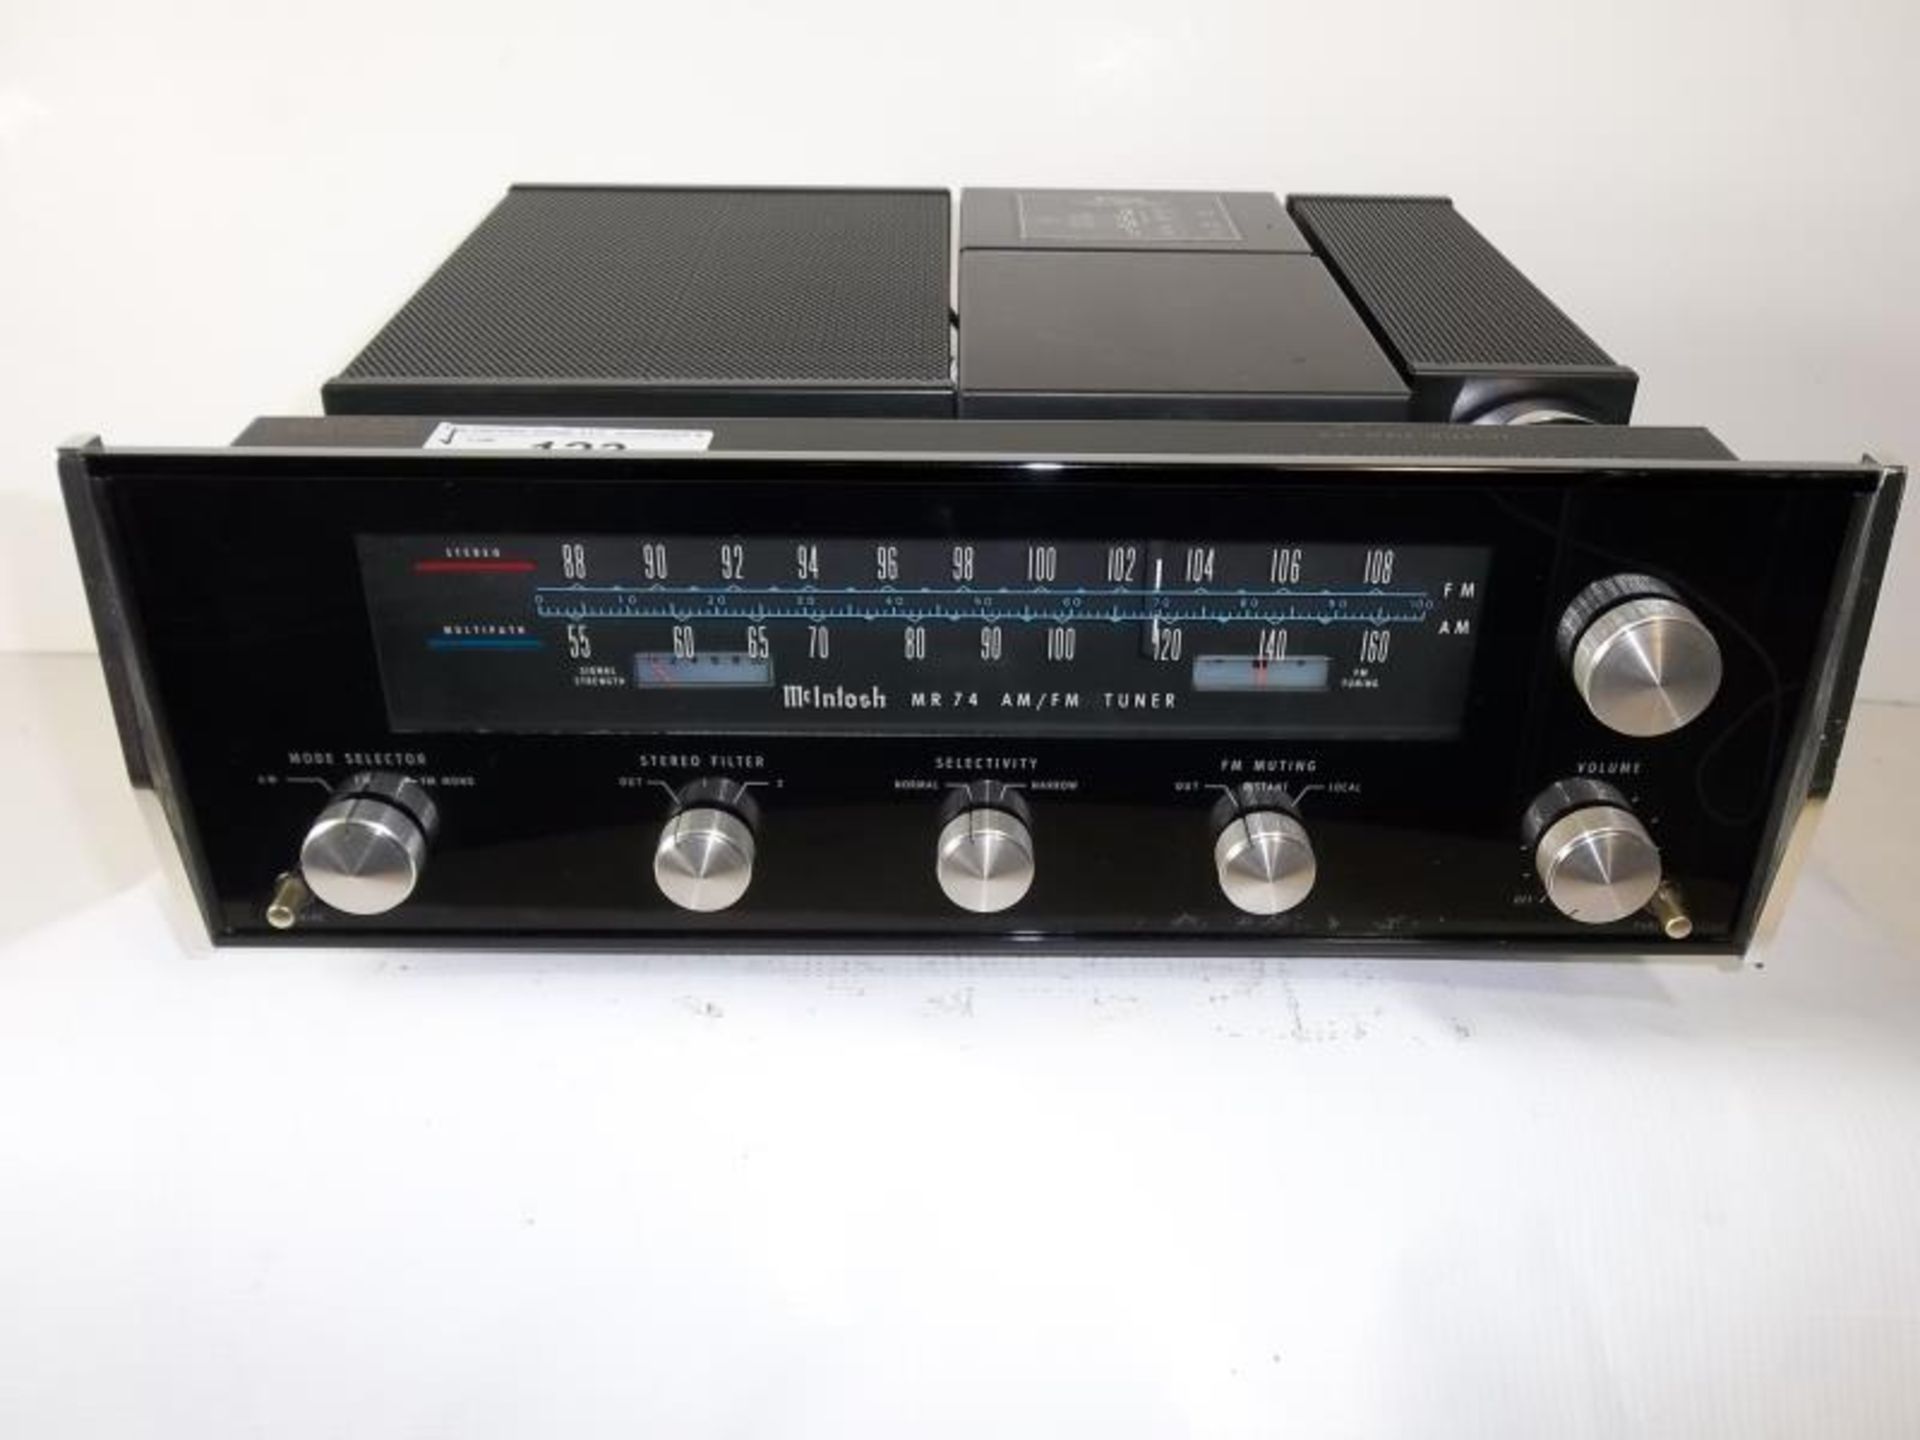 McIntosh MR-74 Stereophonic AM FM Tuner, no case, s # AC6261, tested - powers up